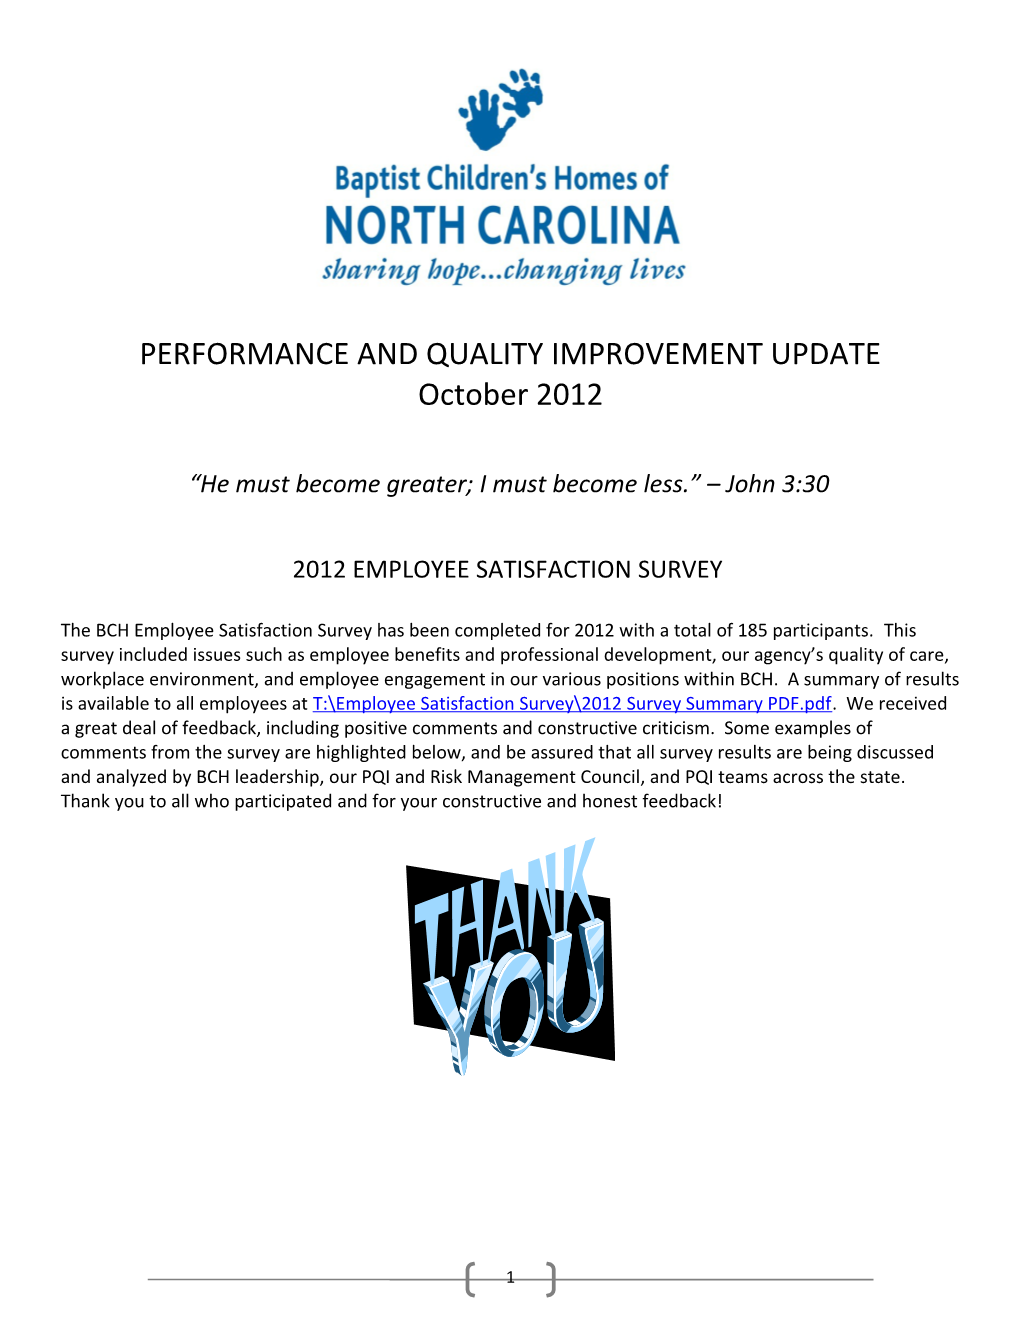 Performance and Quality Improvement Update